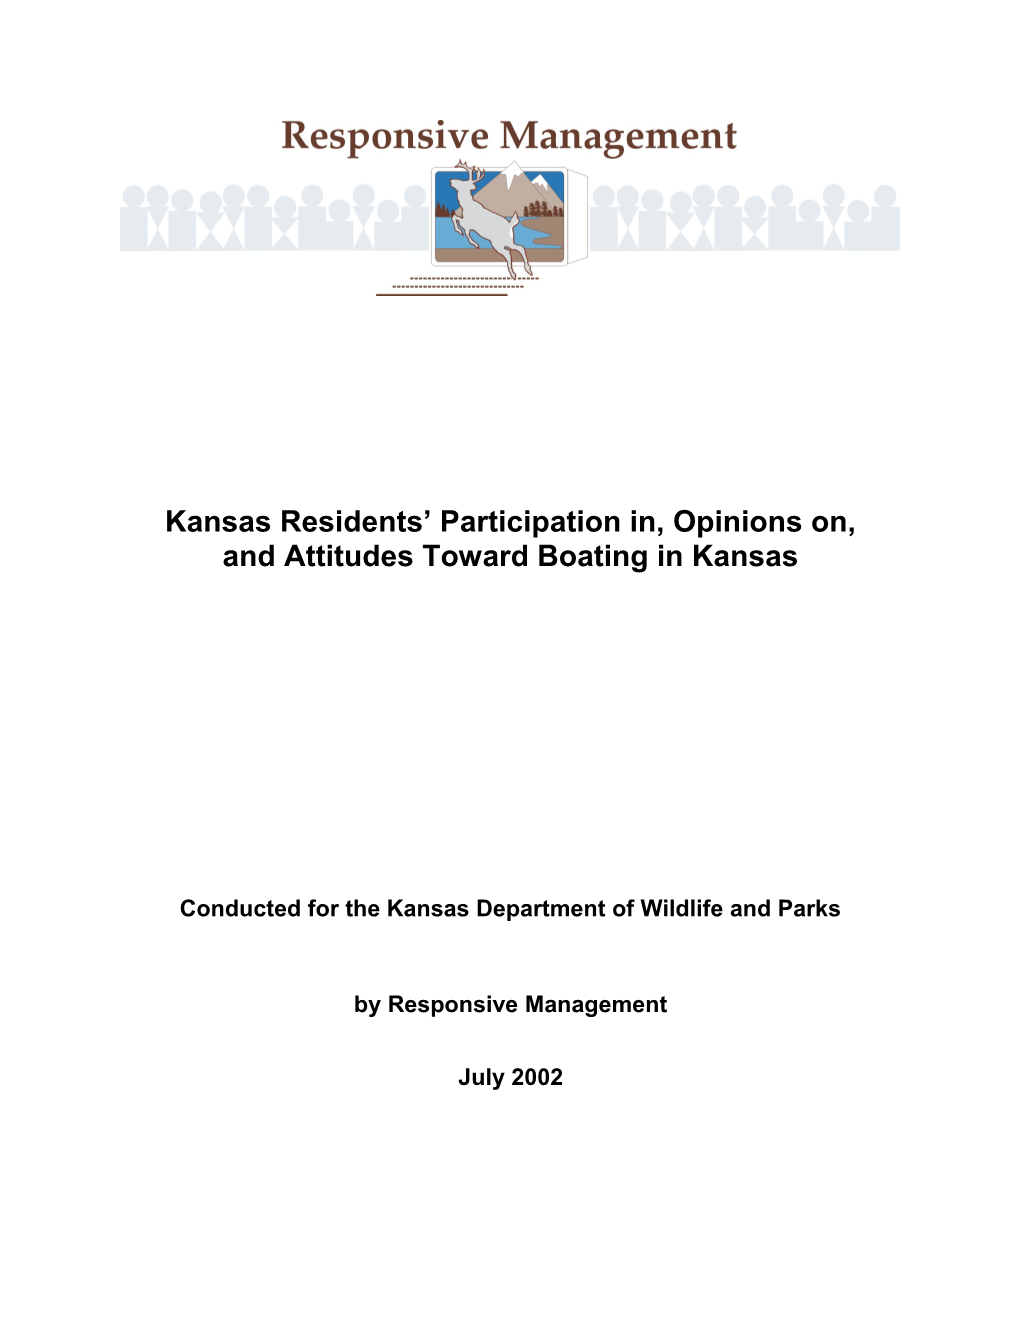 Conducted for the Kansas Department of Wildlife and Parks